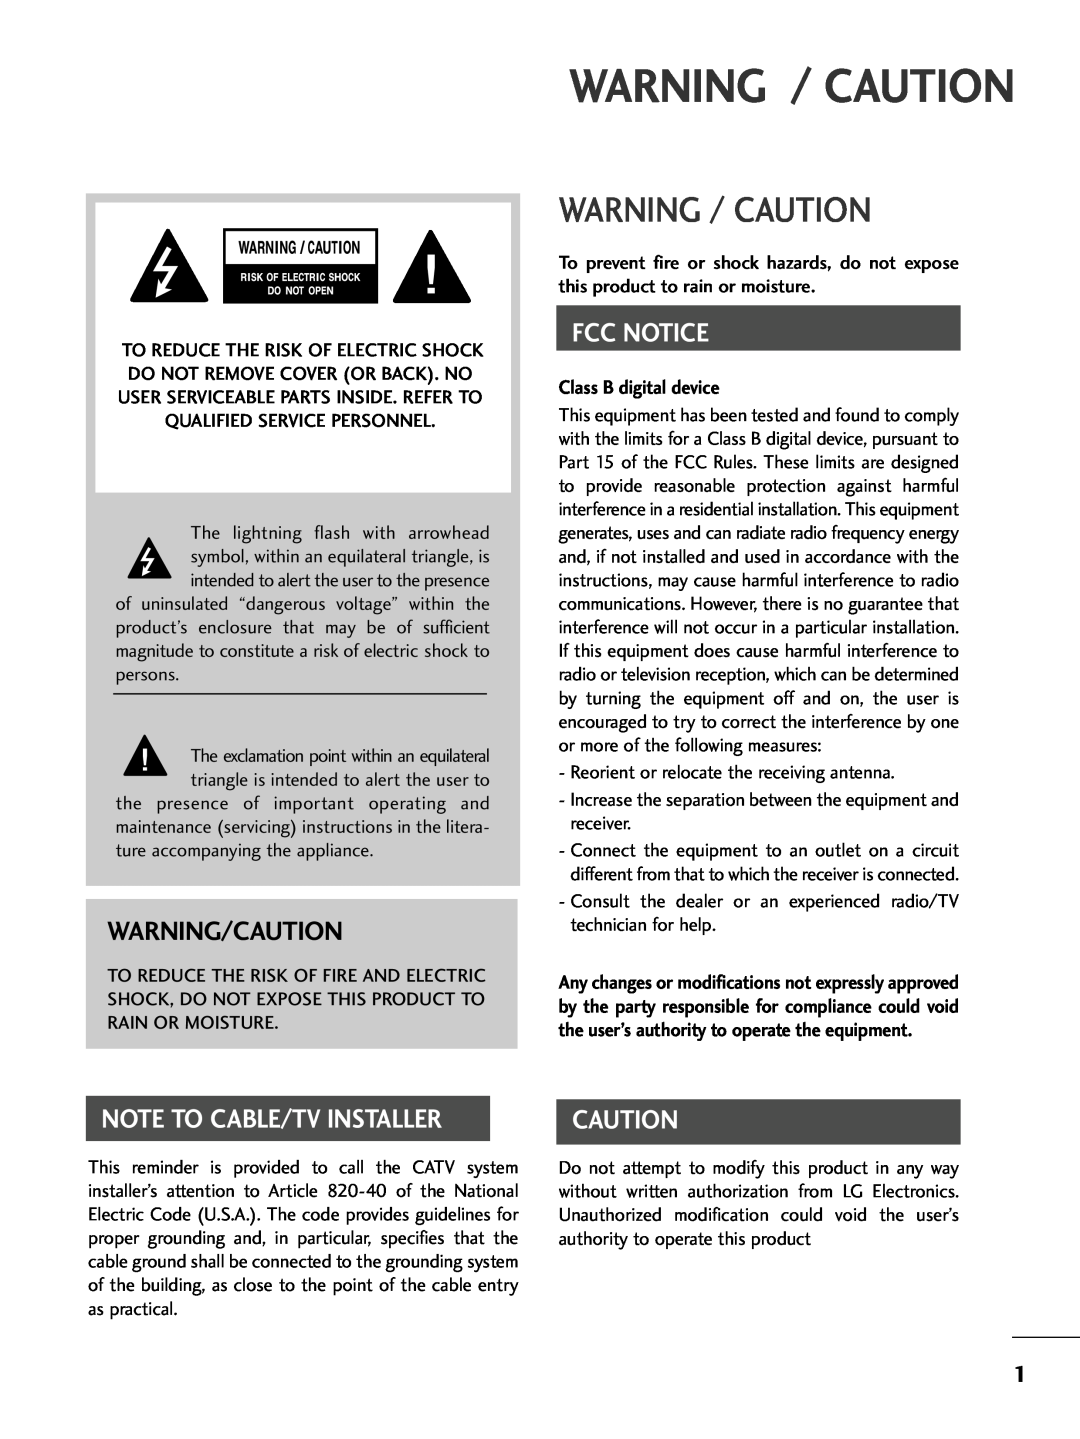 LG Electronics 32PC5DVC Warning / Caution, Warning/Caution, Class B digital device, Fcc Notice, Note To Cable/Tv Installer 